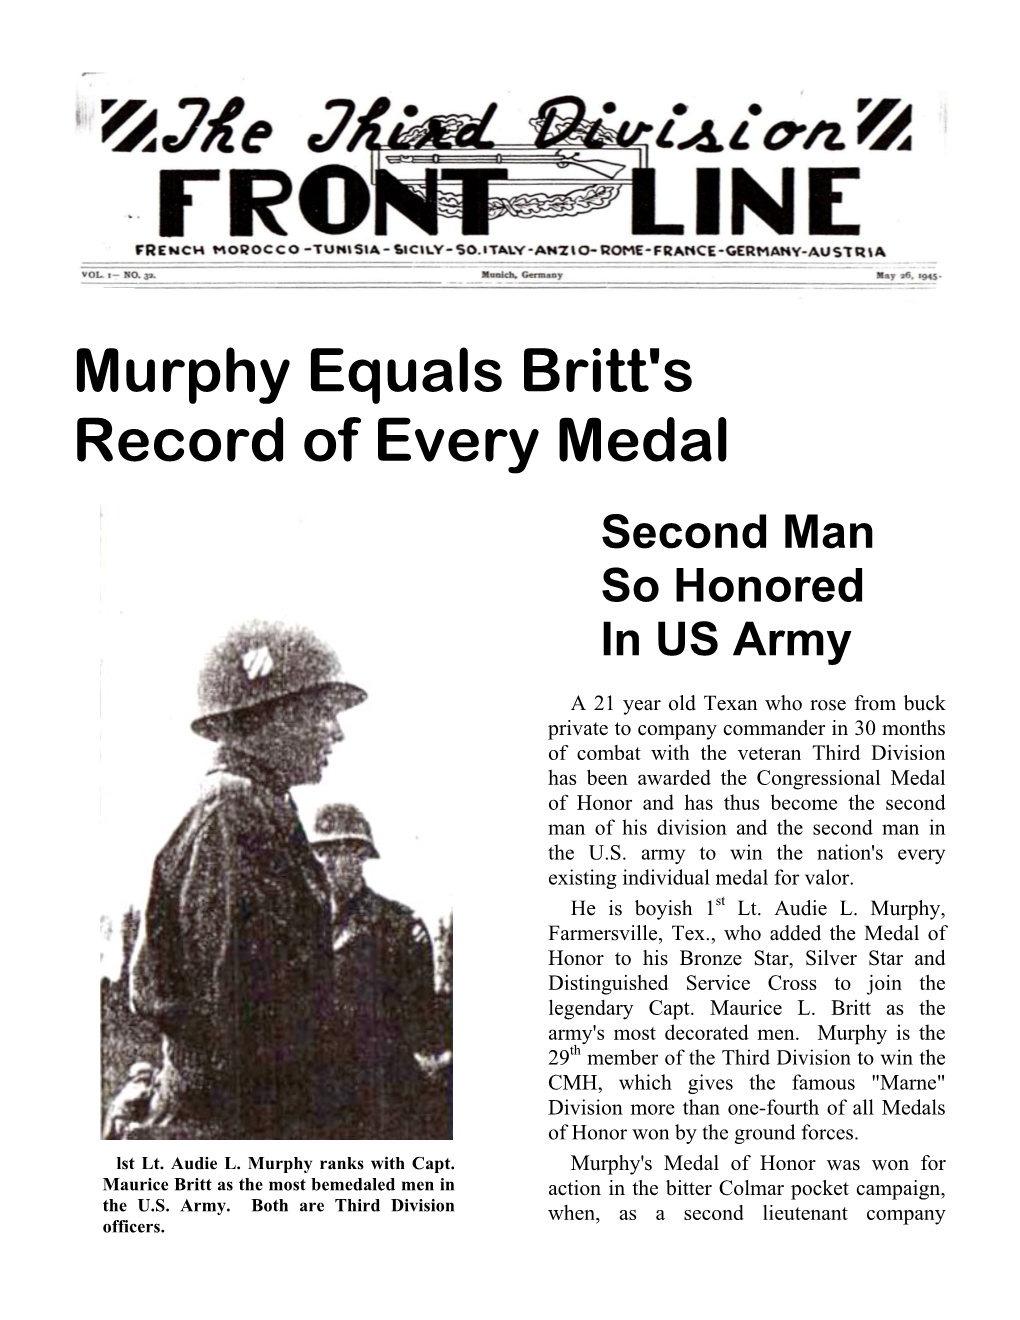 Murphy Equals Britt's Record of Every Medal